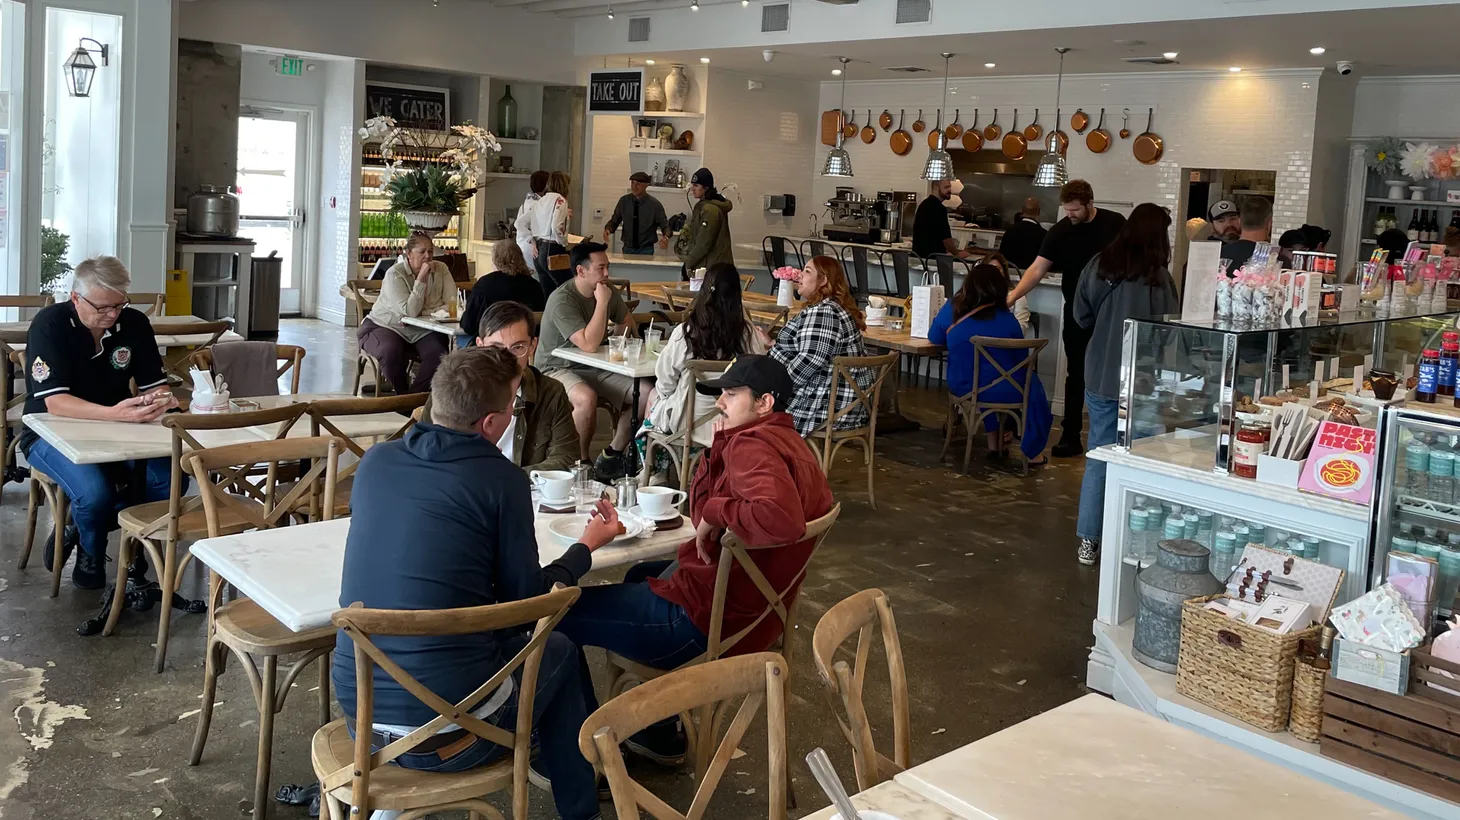 There are fewer people in for lunch at the Burbank restaurant Olive and Thyme, as the Hollywood writers’ strike continues. Like other small businesses, they rely on customers from nearby offices and studios.